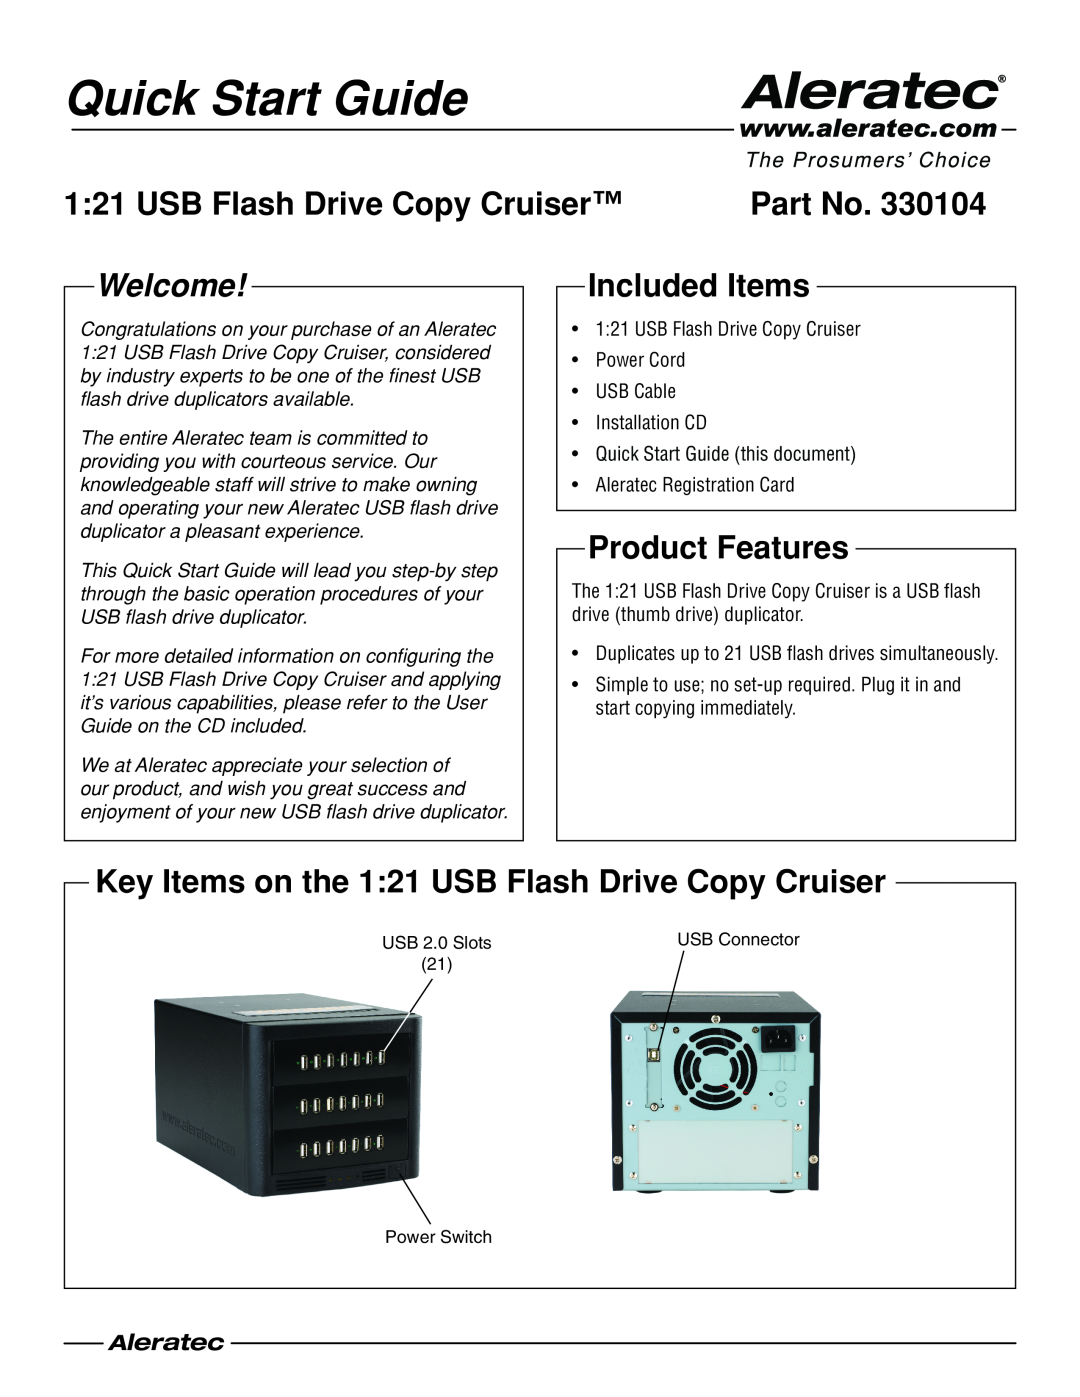 Aleratec 330104 quick start USB Flash Drive Copy Cruiser, Included Items, Product Features, Quick Start Guide, Welcome 